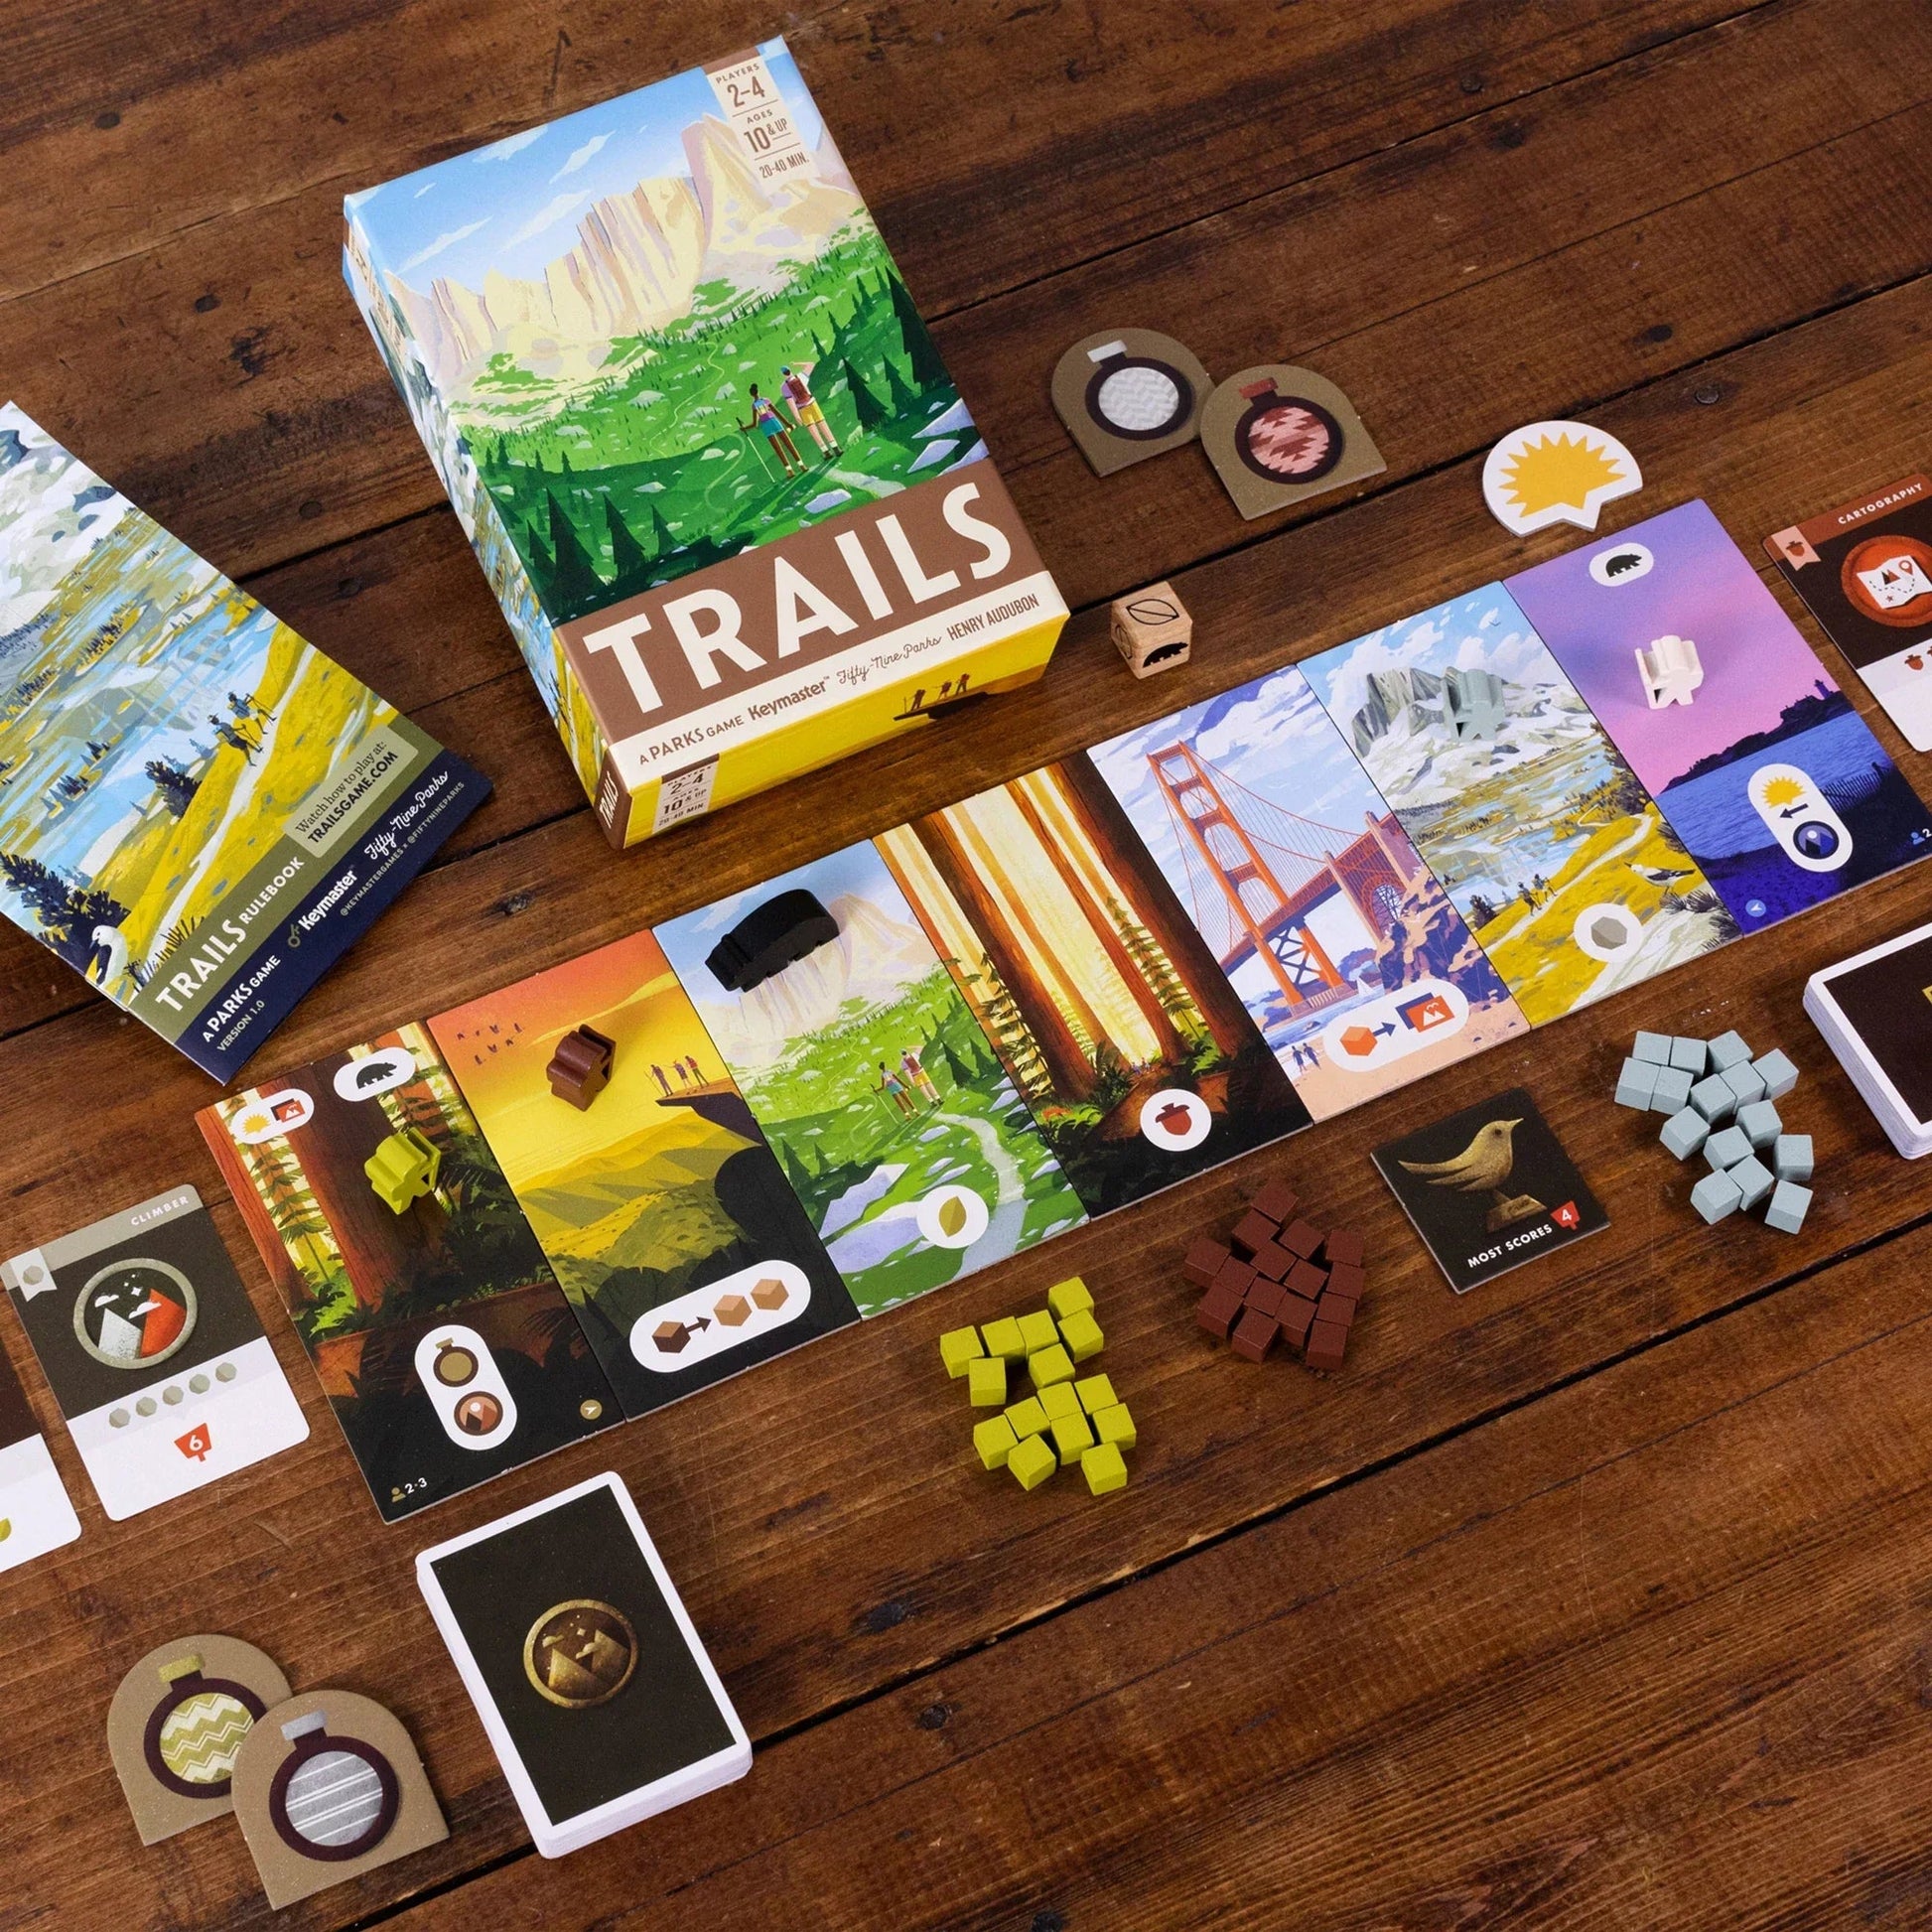 Trails: A Parks Game